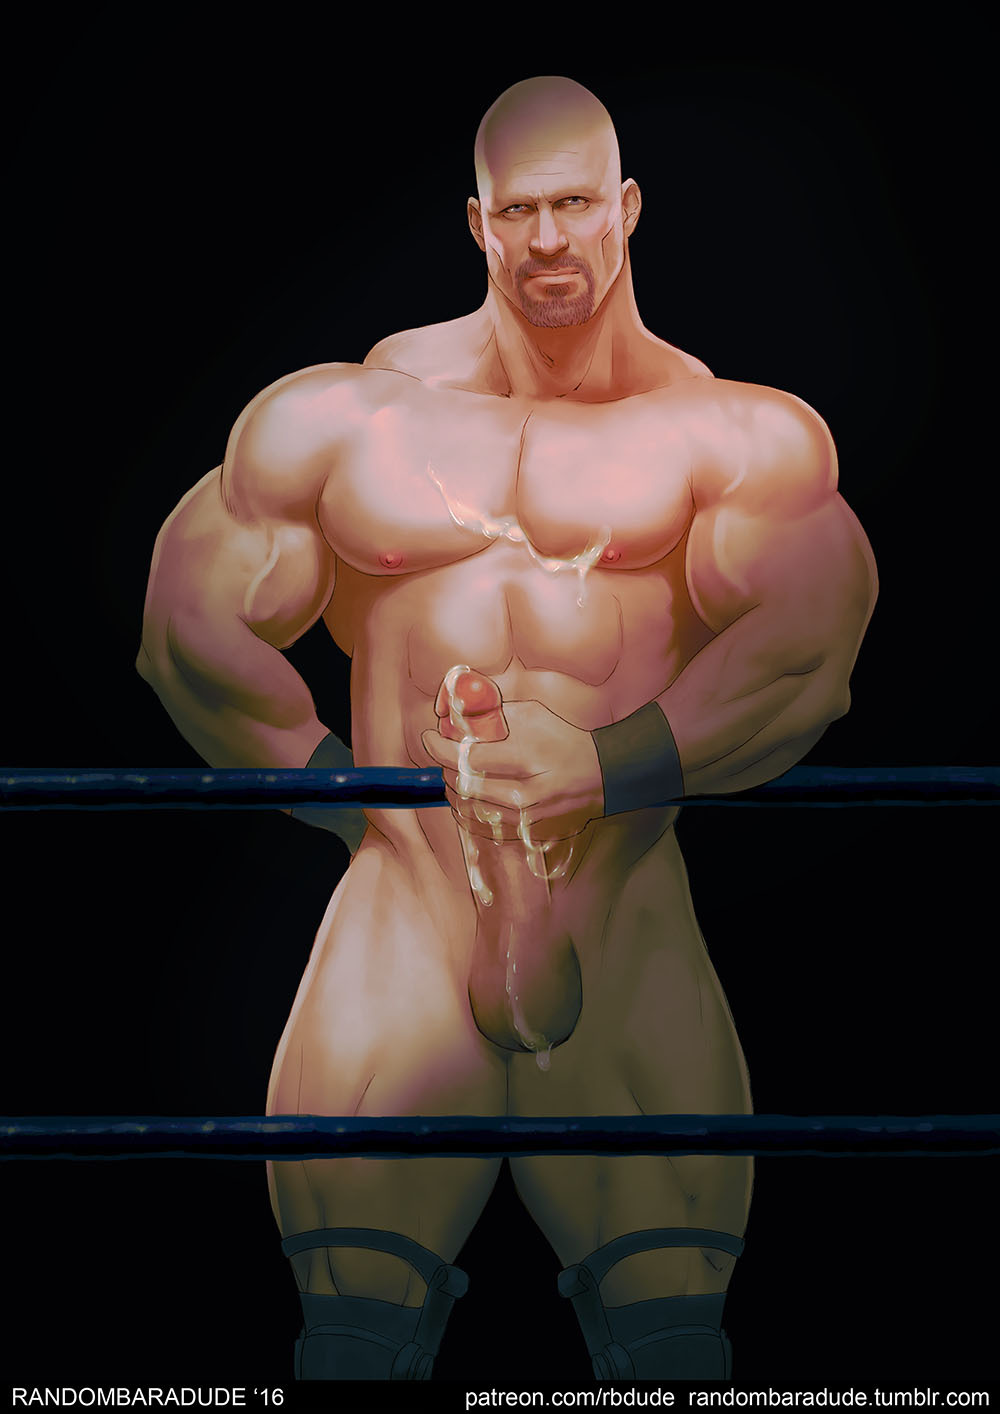 randombaradude: Here you have NSFW version of Stone Cold. I hope you like it! Don’t